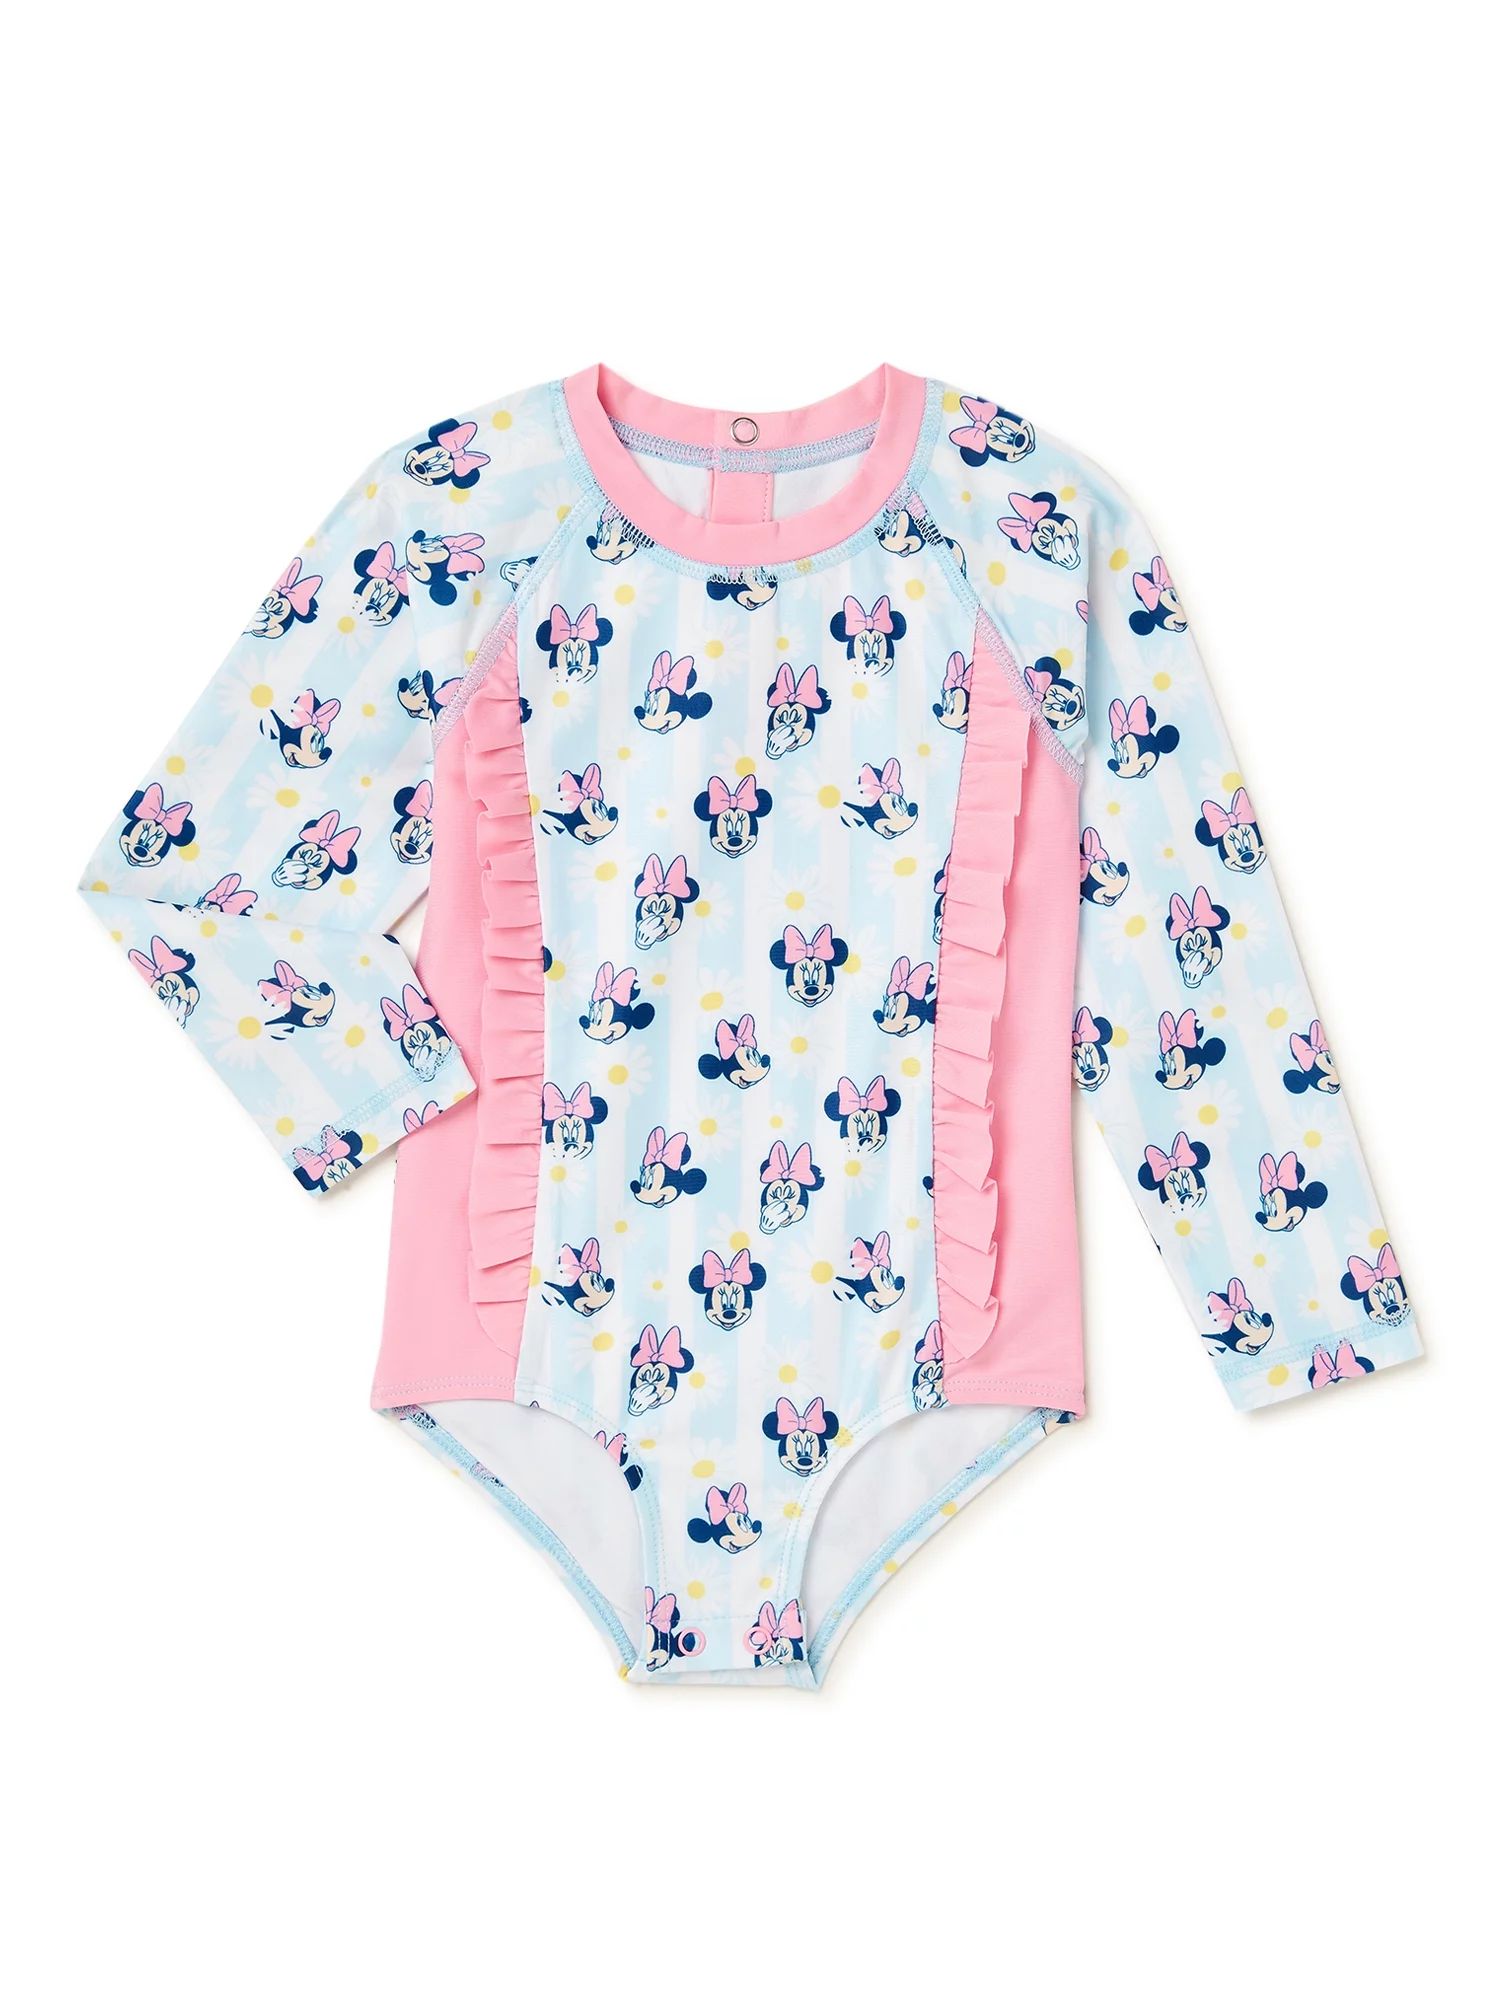 Minnie Mouse Baby and Toddler Girl One-Piece Rash Guard Swimsuit, Sizes 12M-5T | Walmart (US)